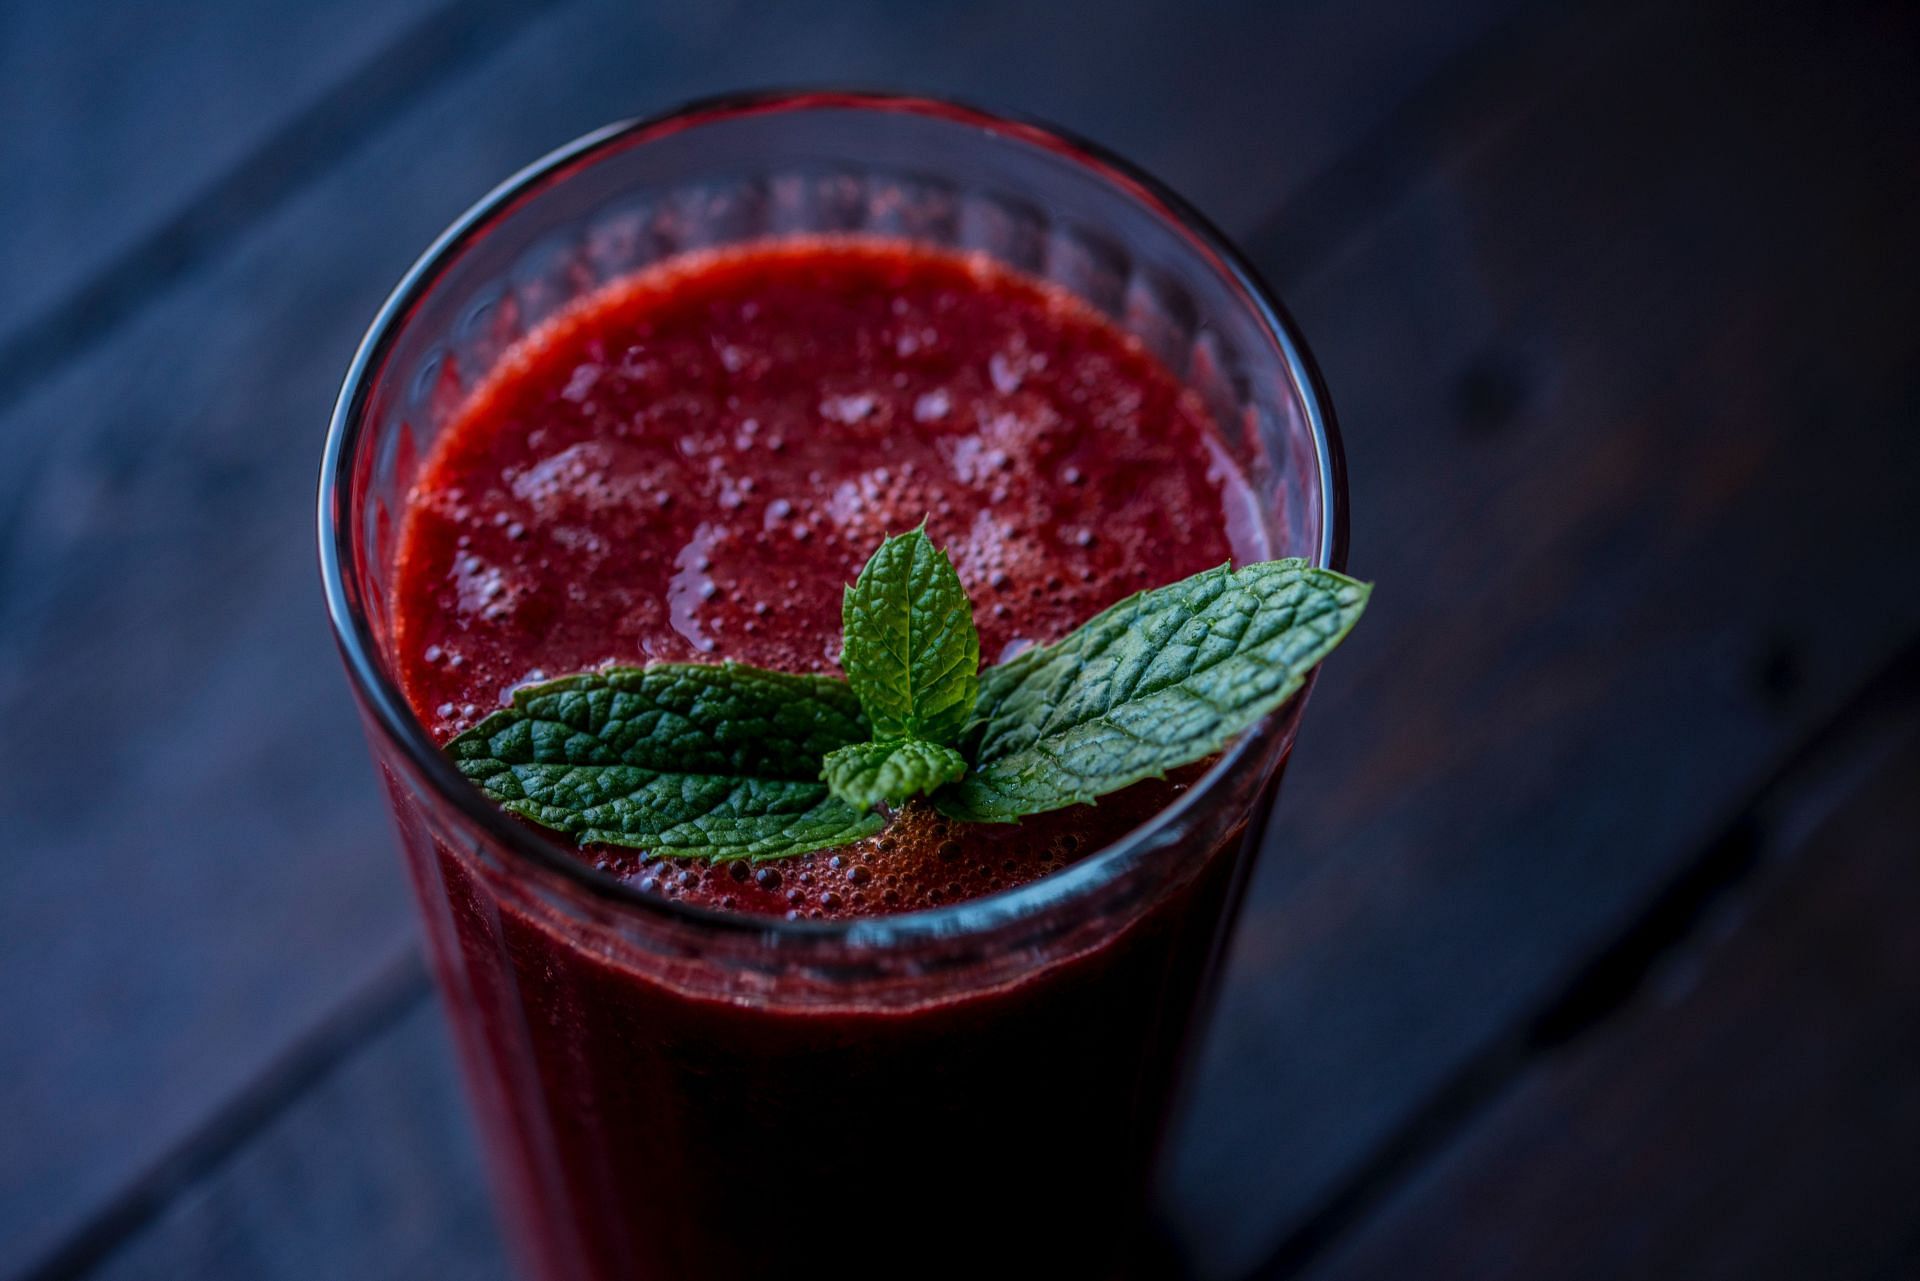 Smoothies can provide nutrients from fruits and vegetables (Image via Unsplash/Joanna Kosinska)